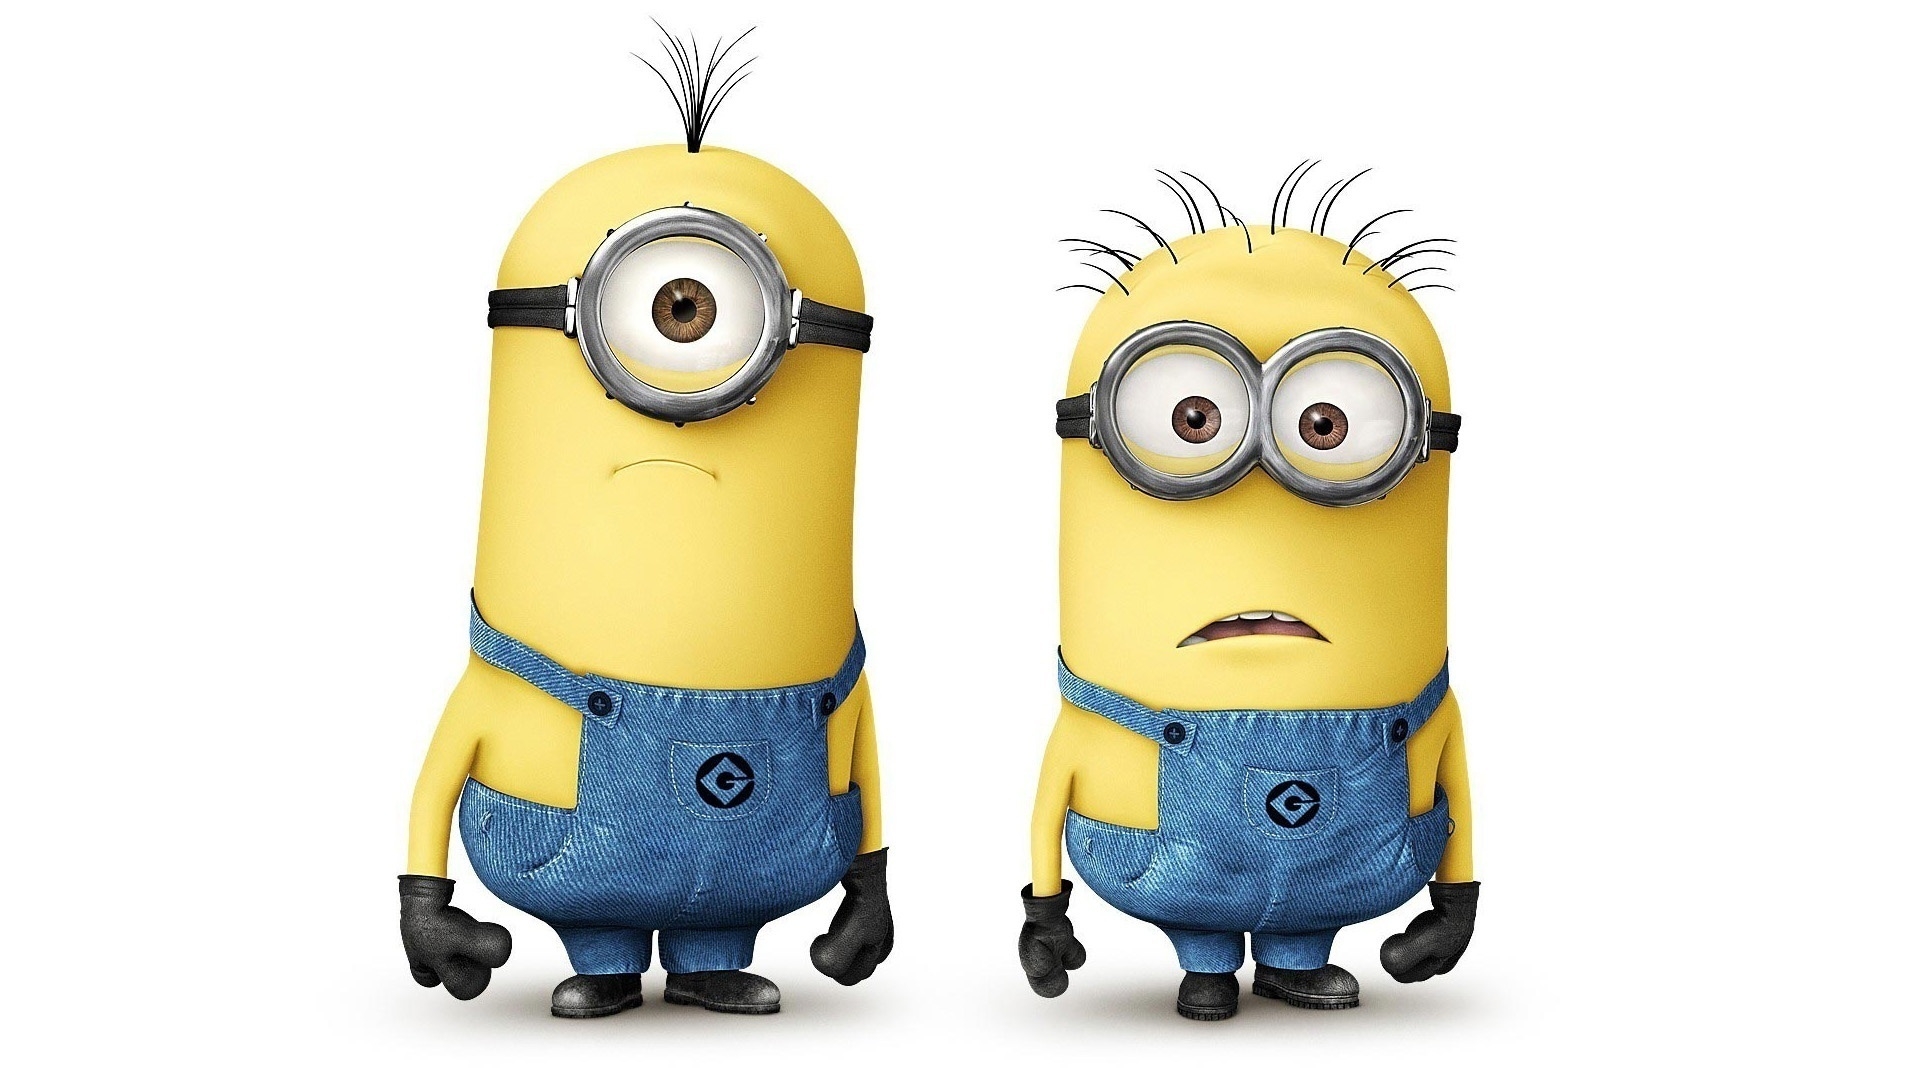 2013 Despicable Me 2 for 1920 x 1080 HDTV 1080p resolution